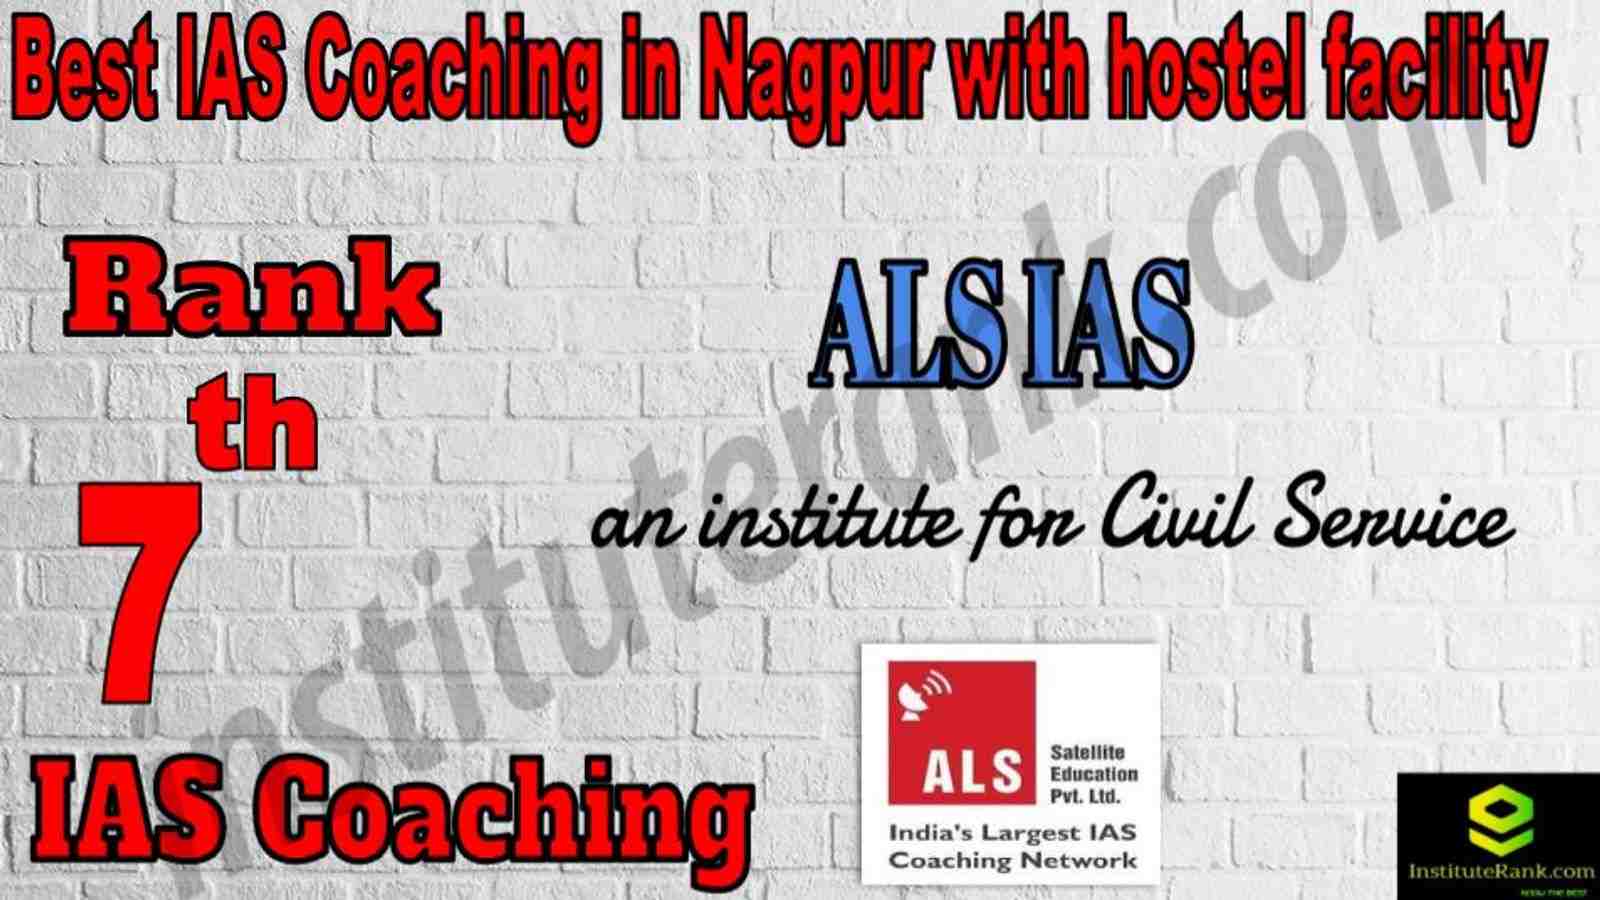 7th Best IAS Coaching in Nagpur with hostel facility